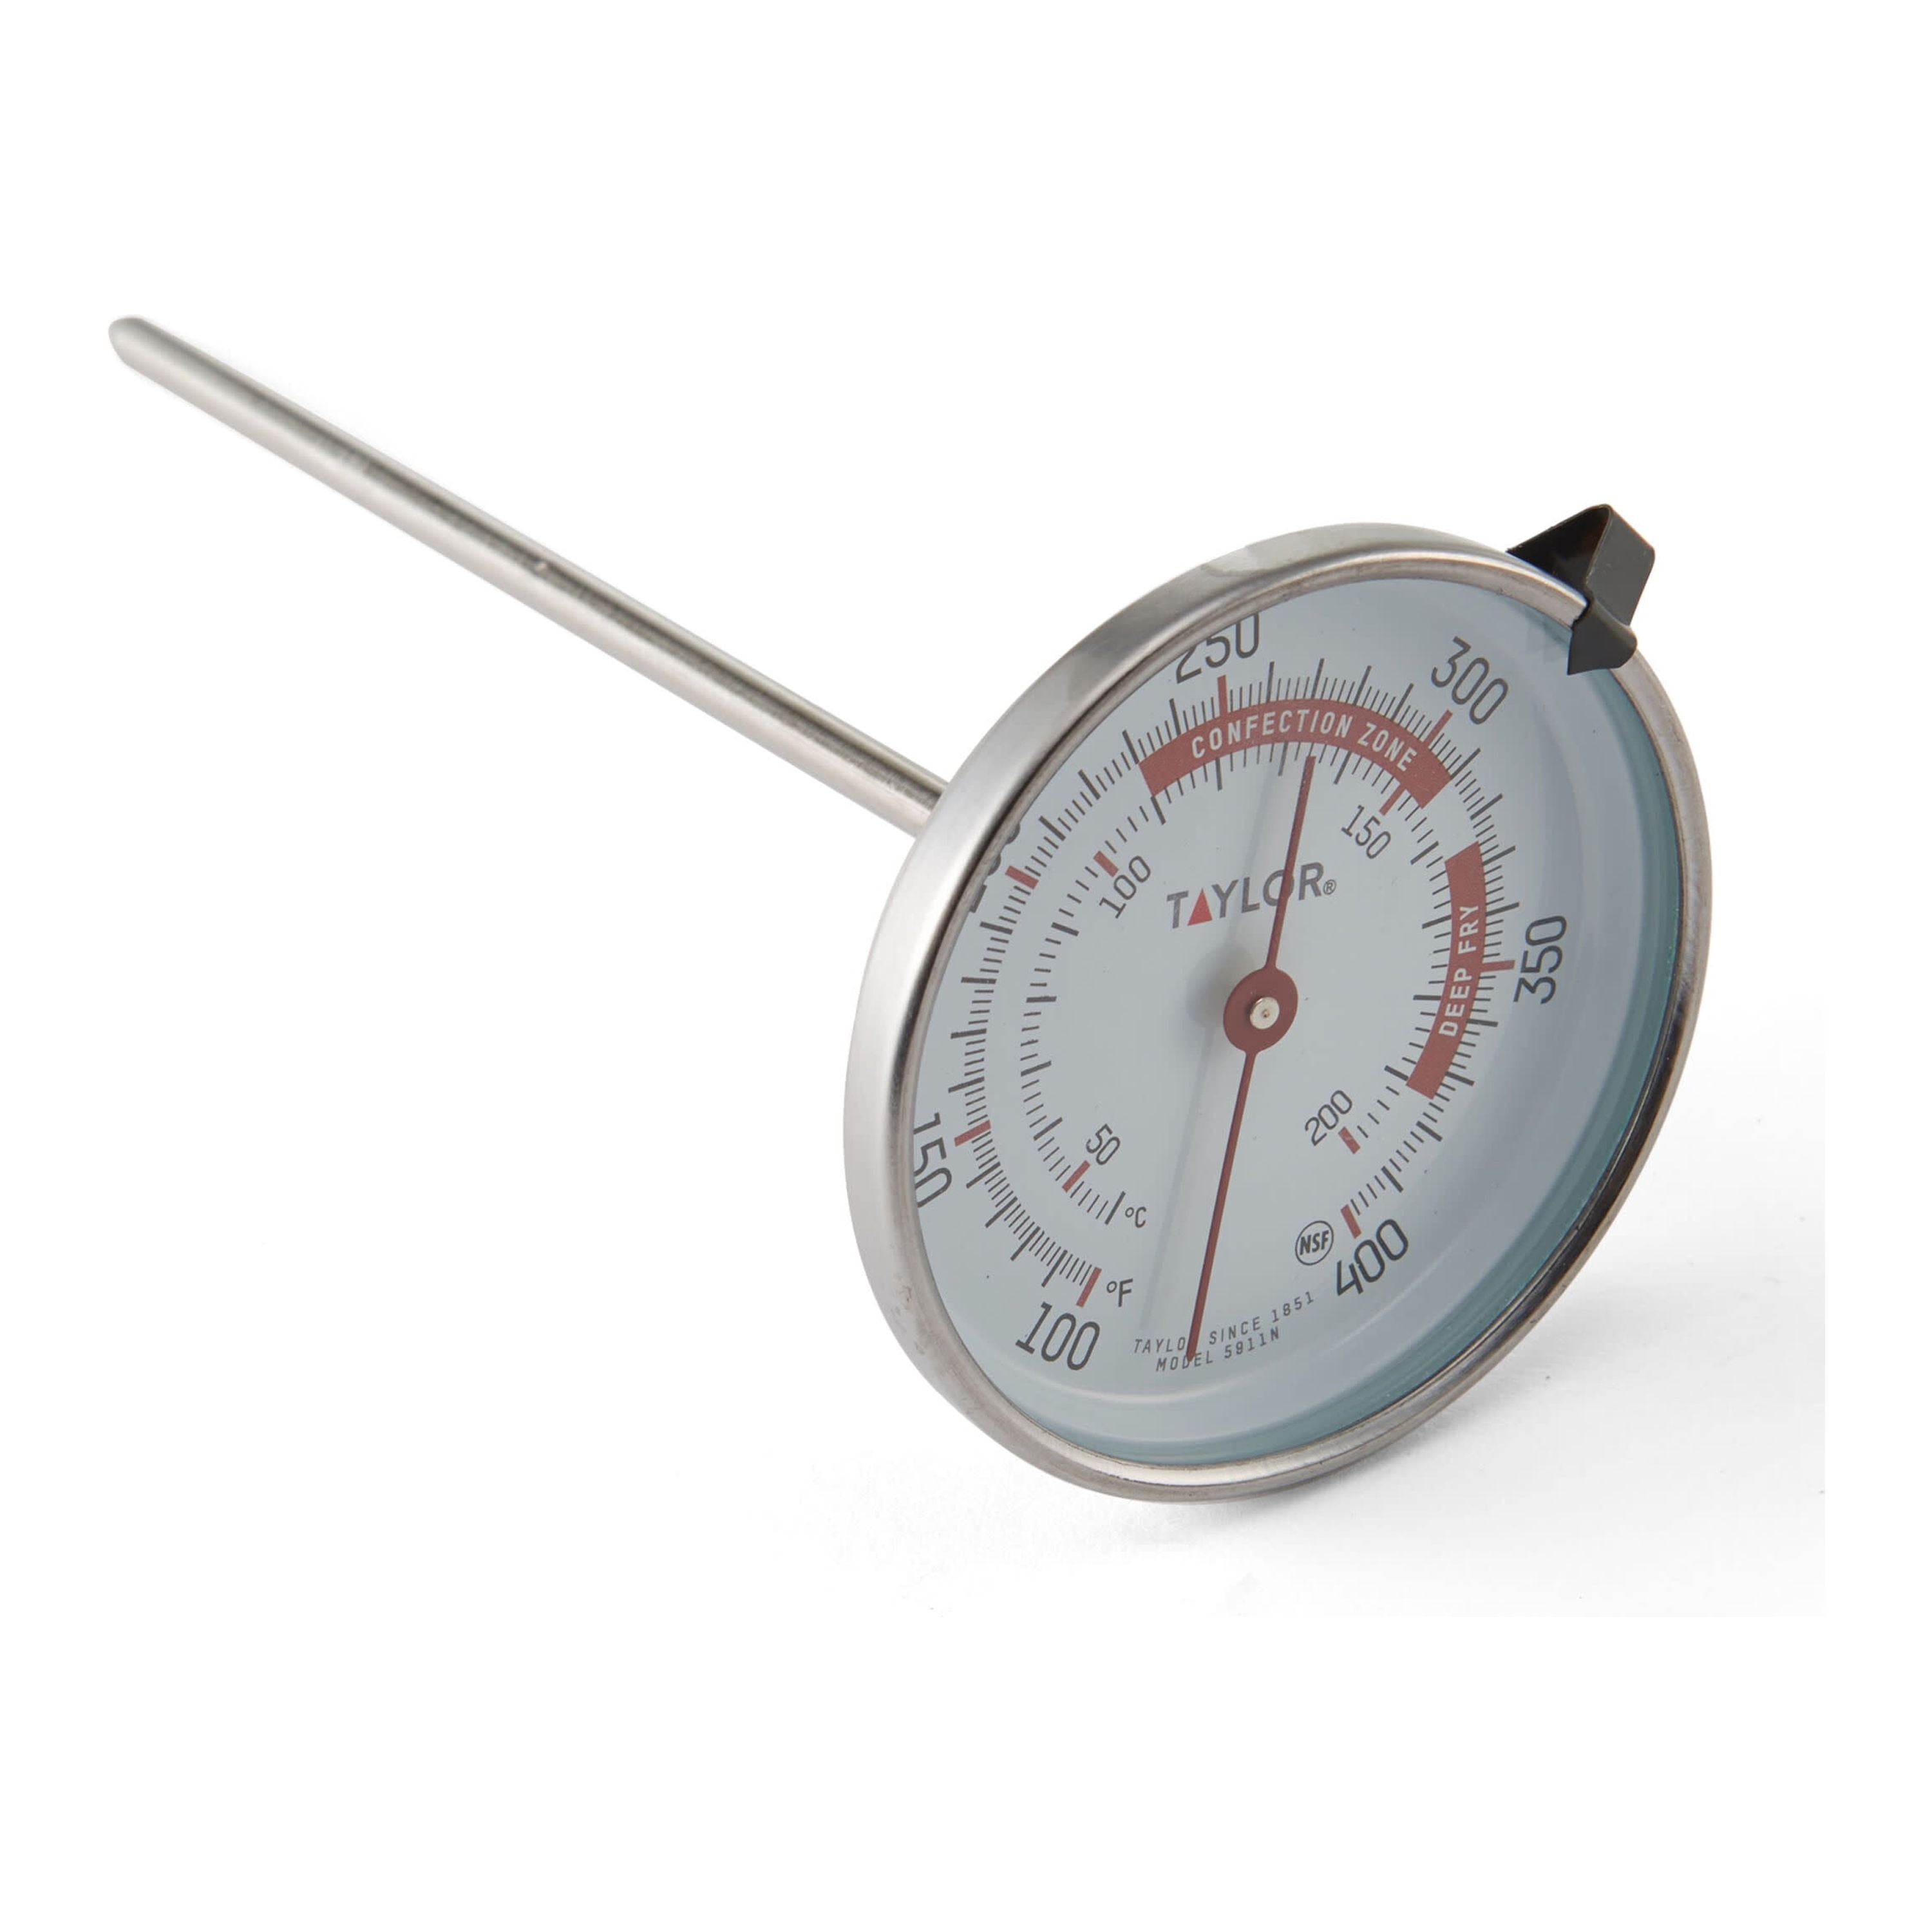 Taylor Candy/Deep Fry Thermometer - Stainless Steel